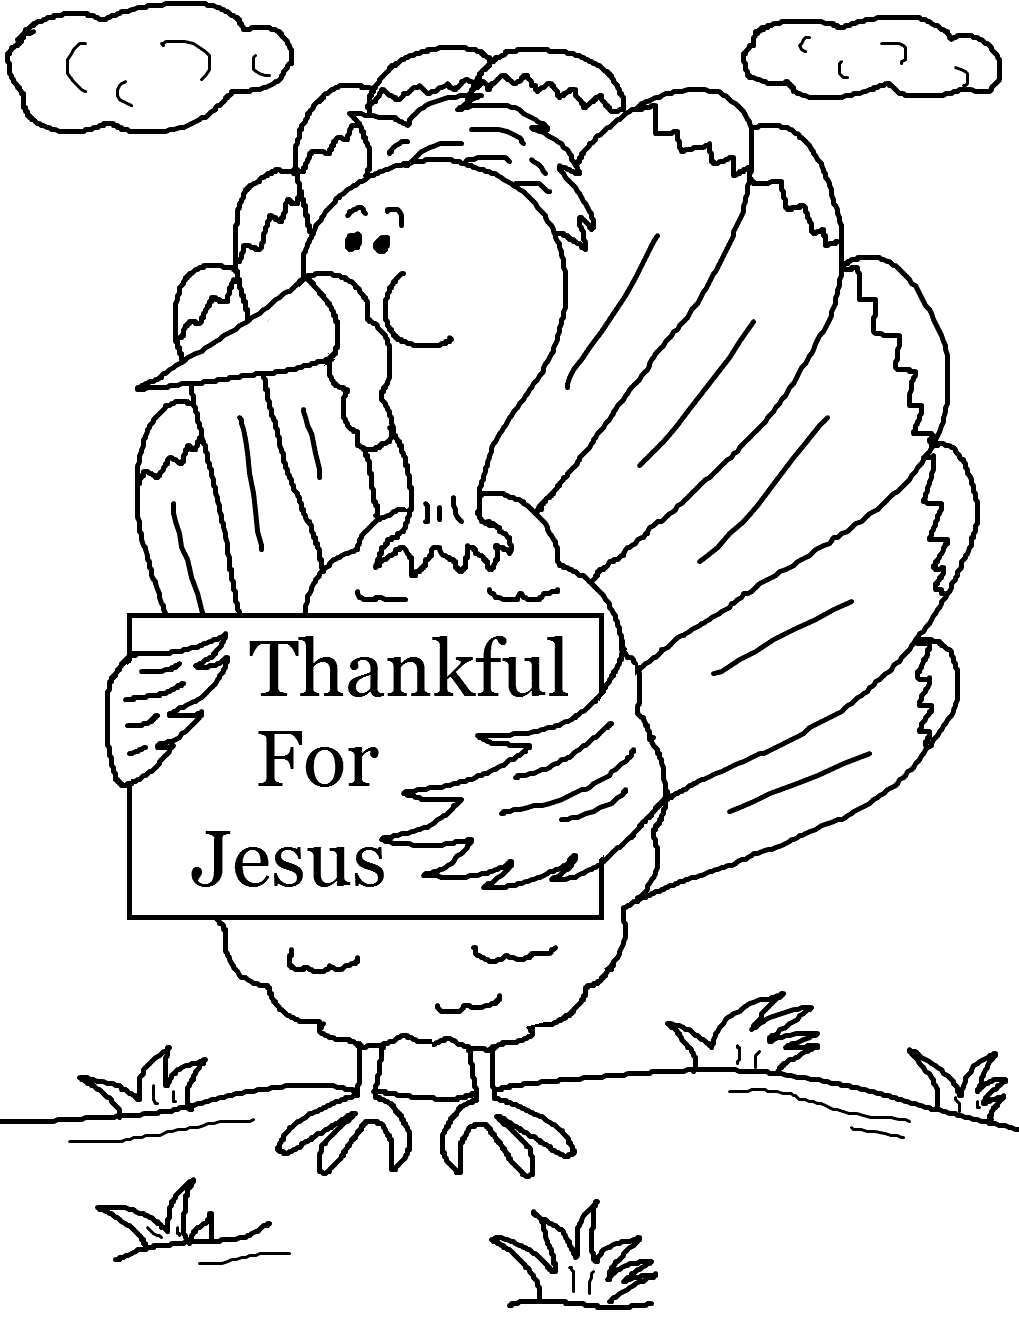 Free Free Turkey Coloring Pages Thankful for Jesus printable